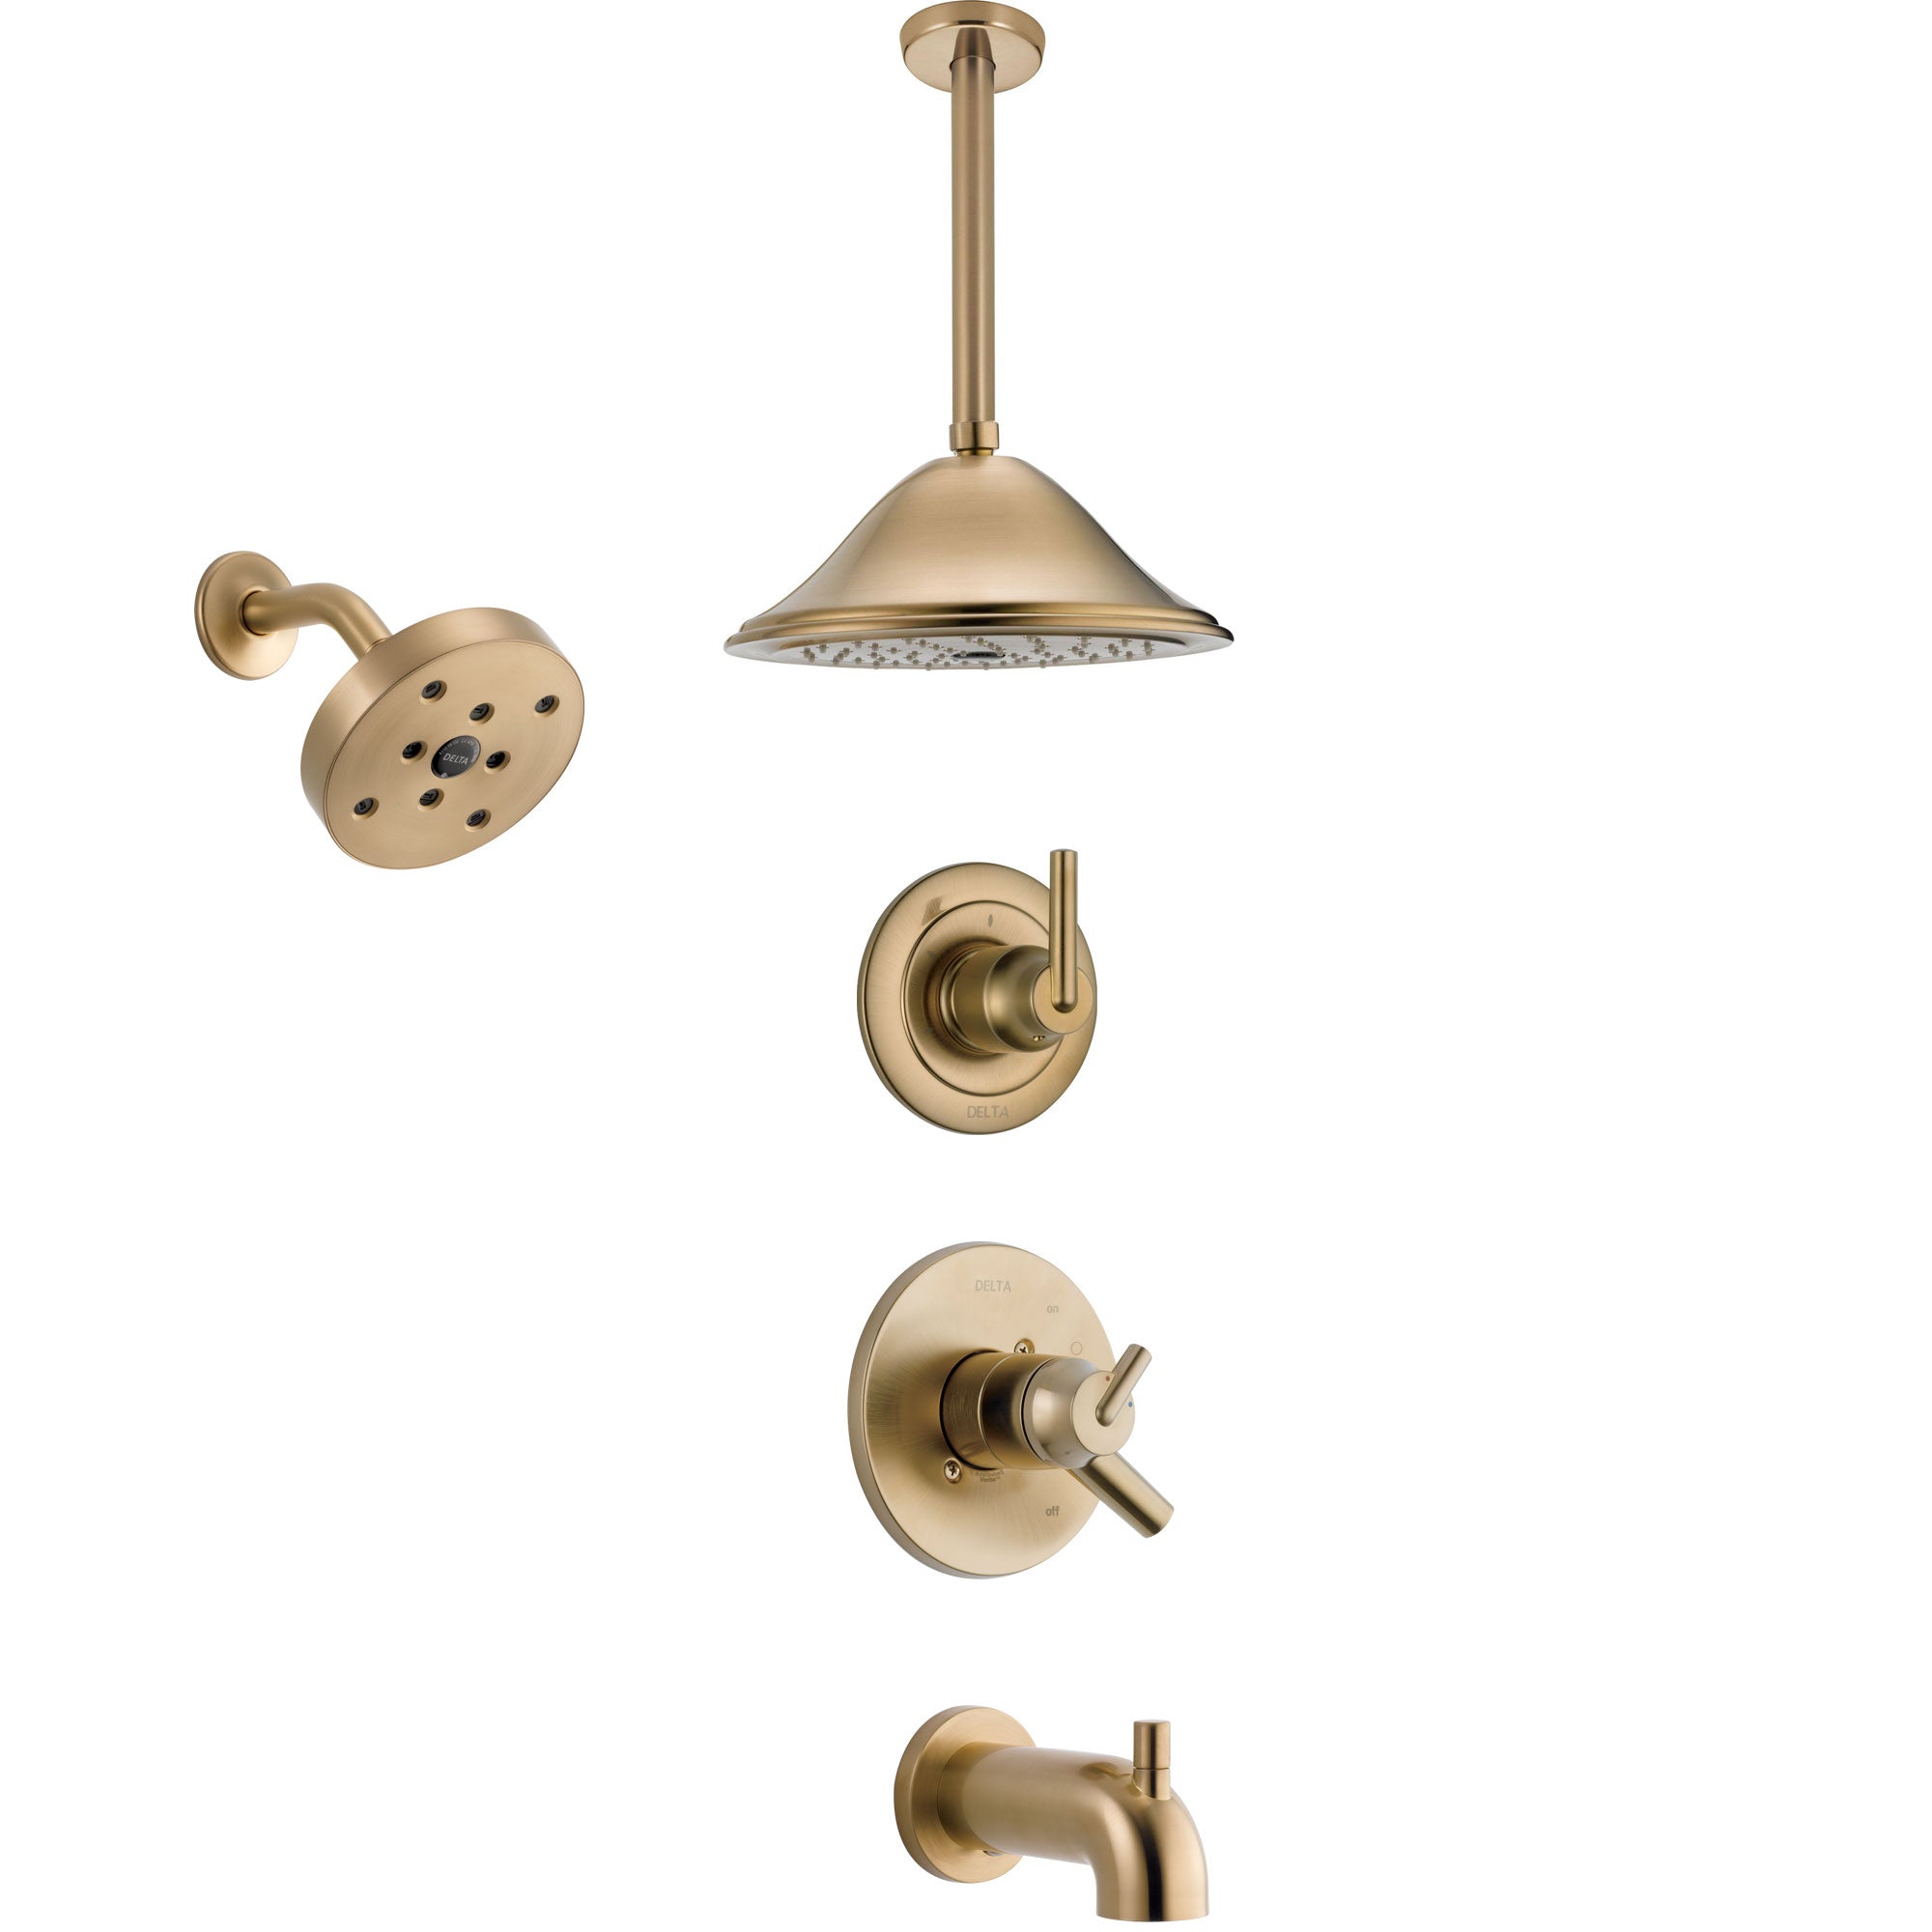 Delta Trinsic Champagne Bronze Tub and Shower System with Dual Control Handle, 3-Setting Diverter, Showerhead, and Ceiling Mount Showerhead SS17459CZ4